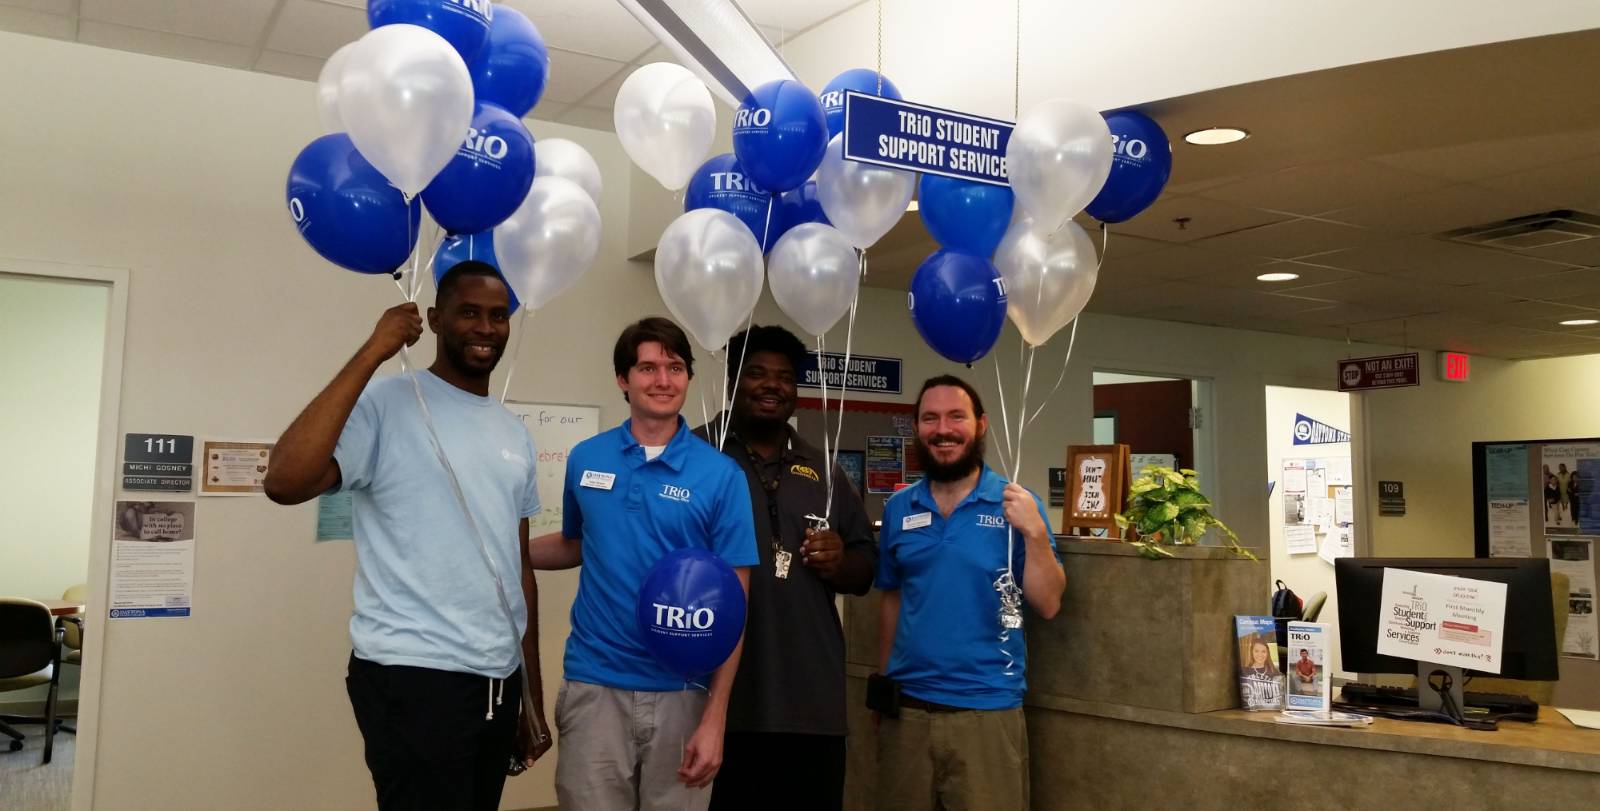 trio tutors at the front desk with balloons